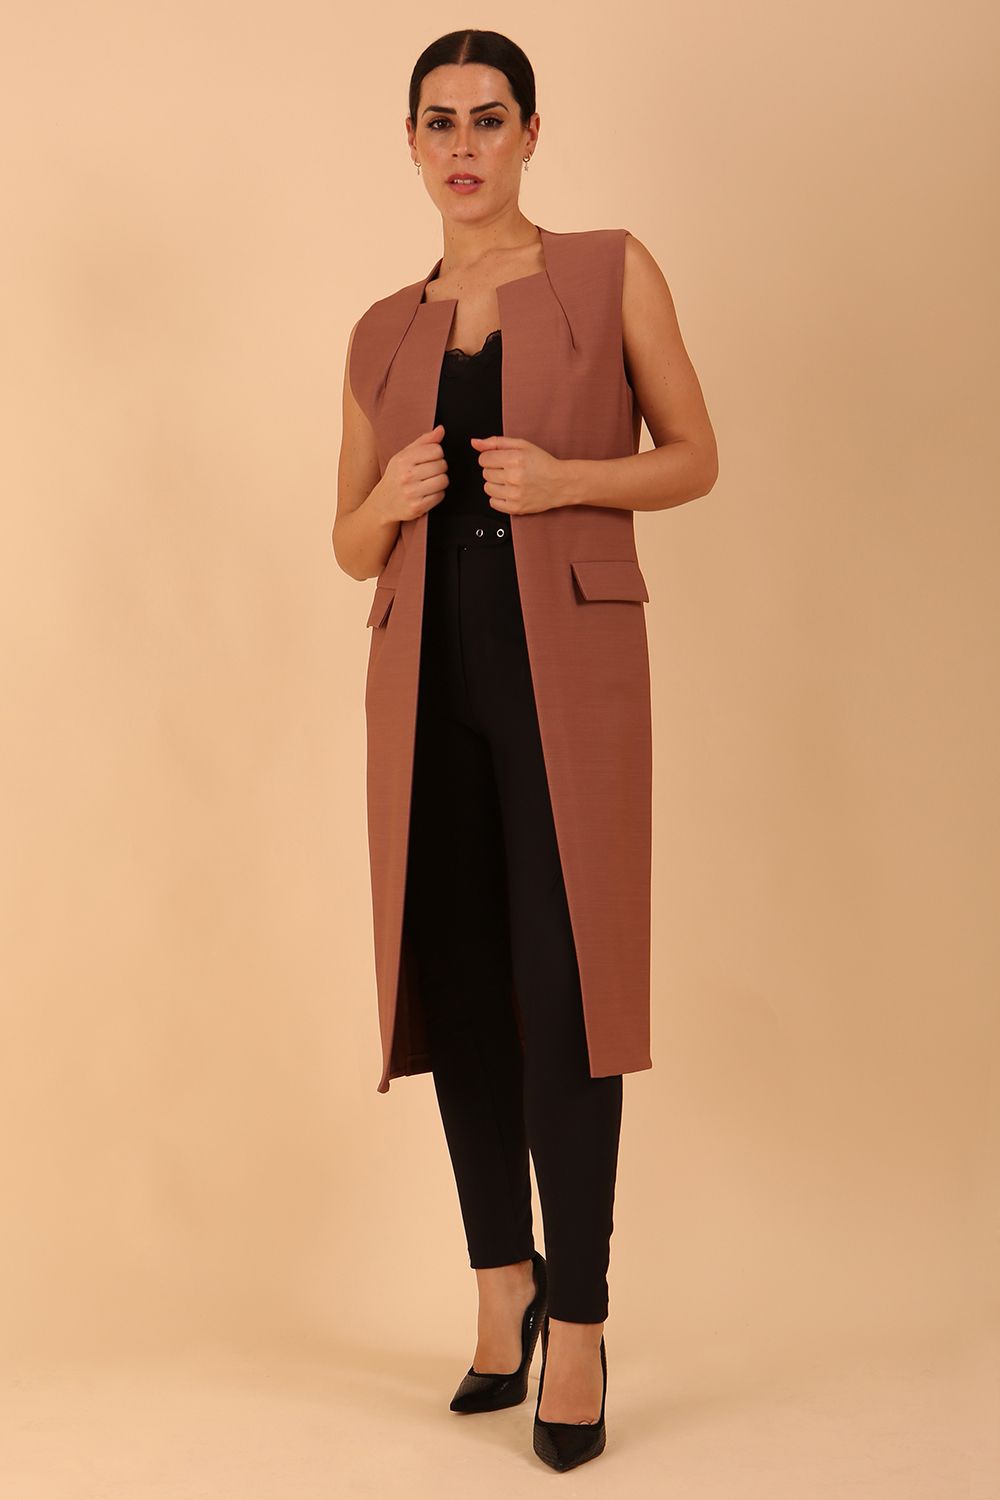 model wearing a divacatwalk Seed Harvard Sleeveless Coat midi length in Acorn Brown colour front